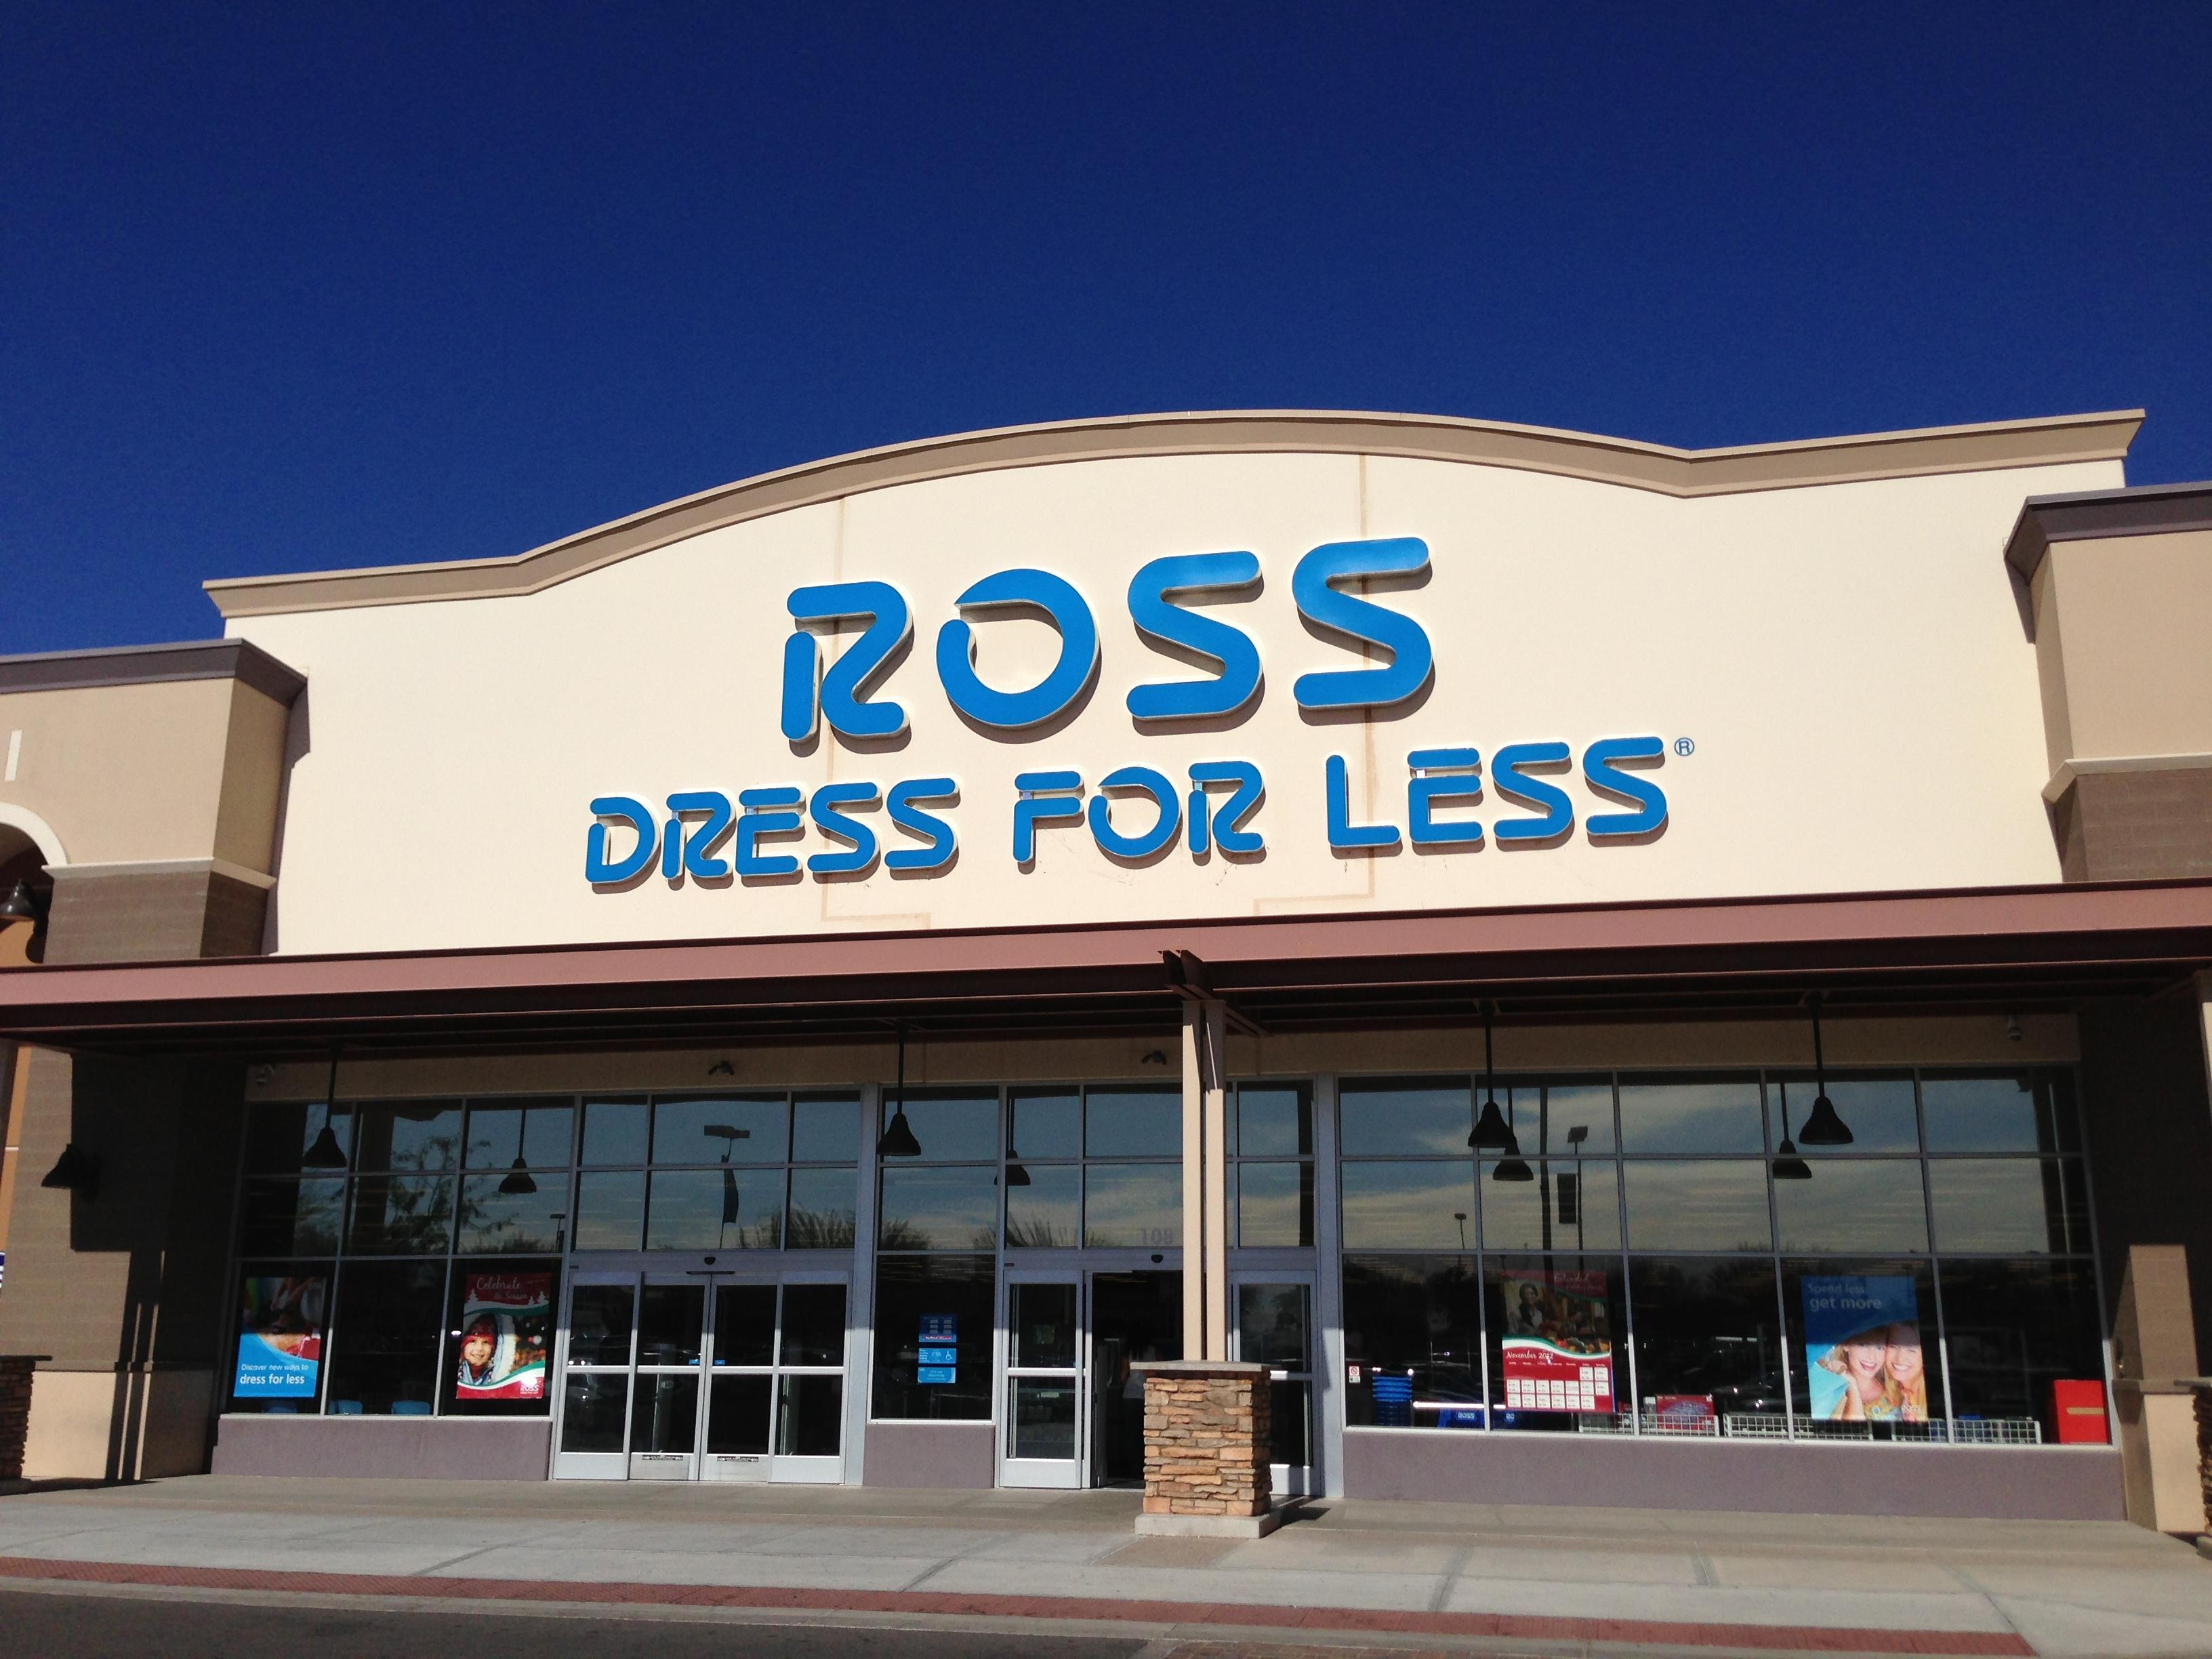 https://talkmarkets.com/content/stocks--equities/ross-the-bargain-store-becomes-a-bargain?post=141861